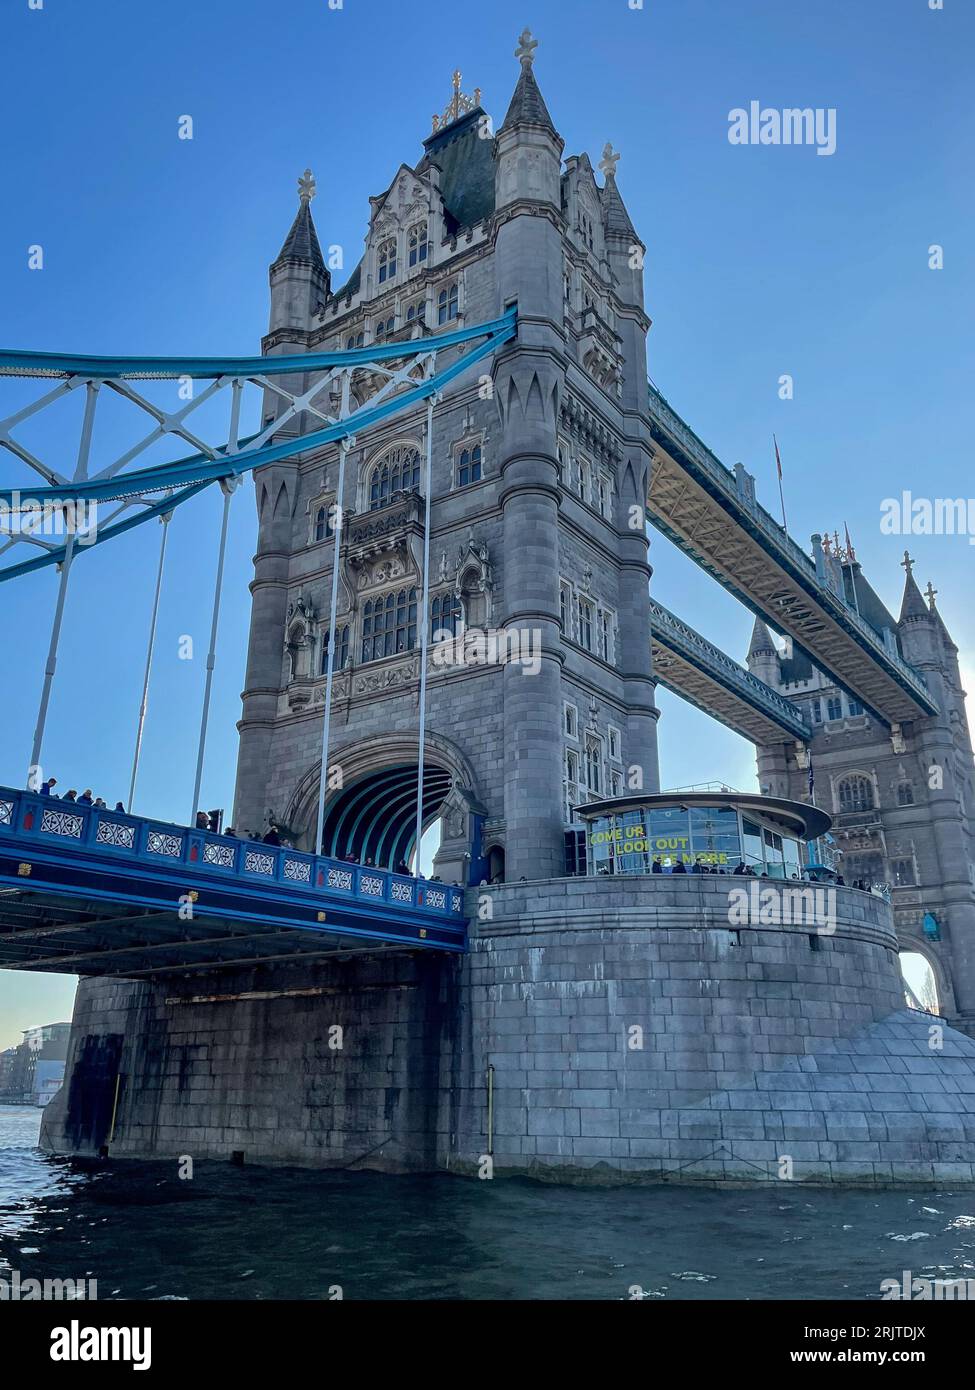 A scenic shot of a bustling city skyline featuring a large bridge: London Stock Photo